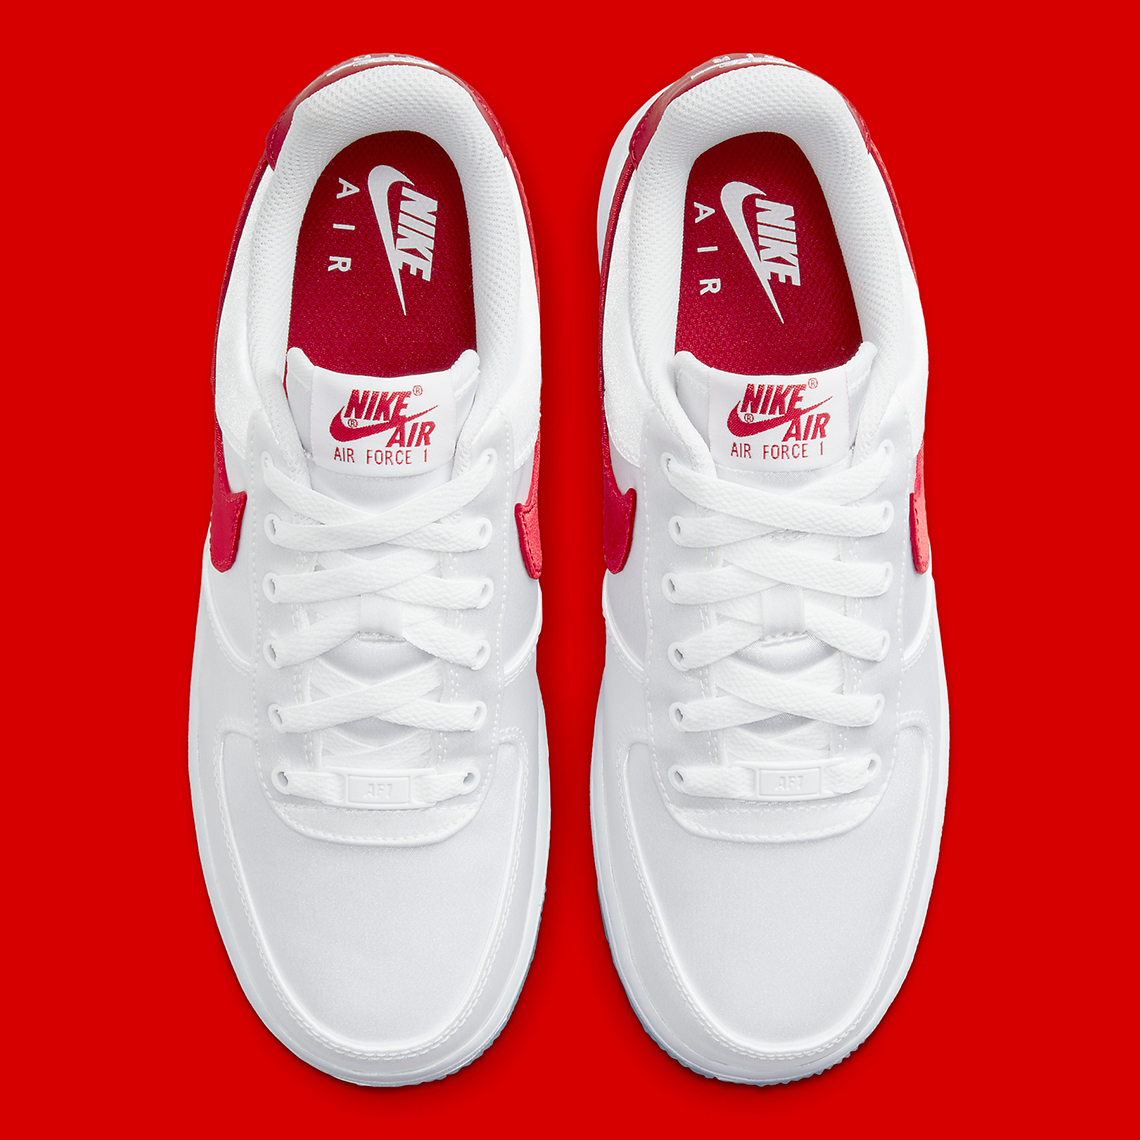 nike color air force 1 low satin white red dx6541 100 1